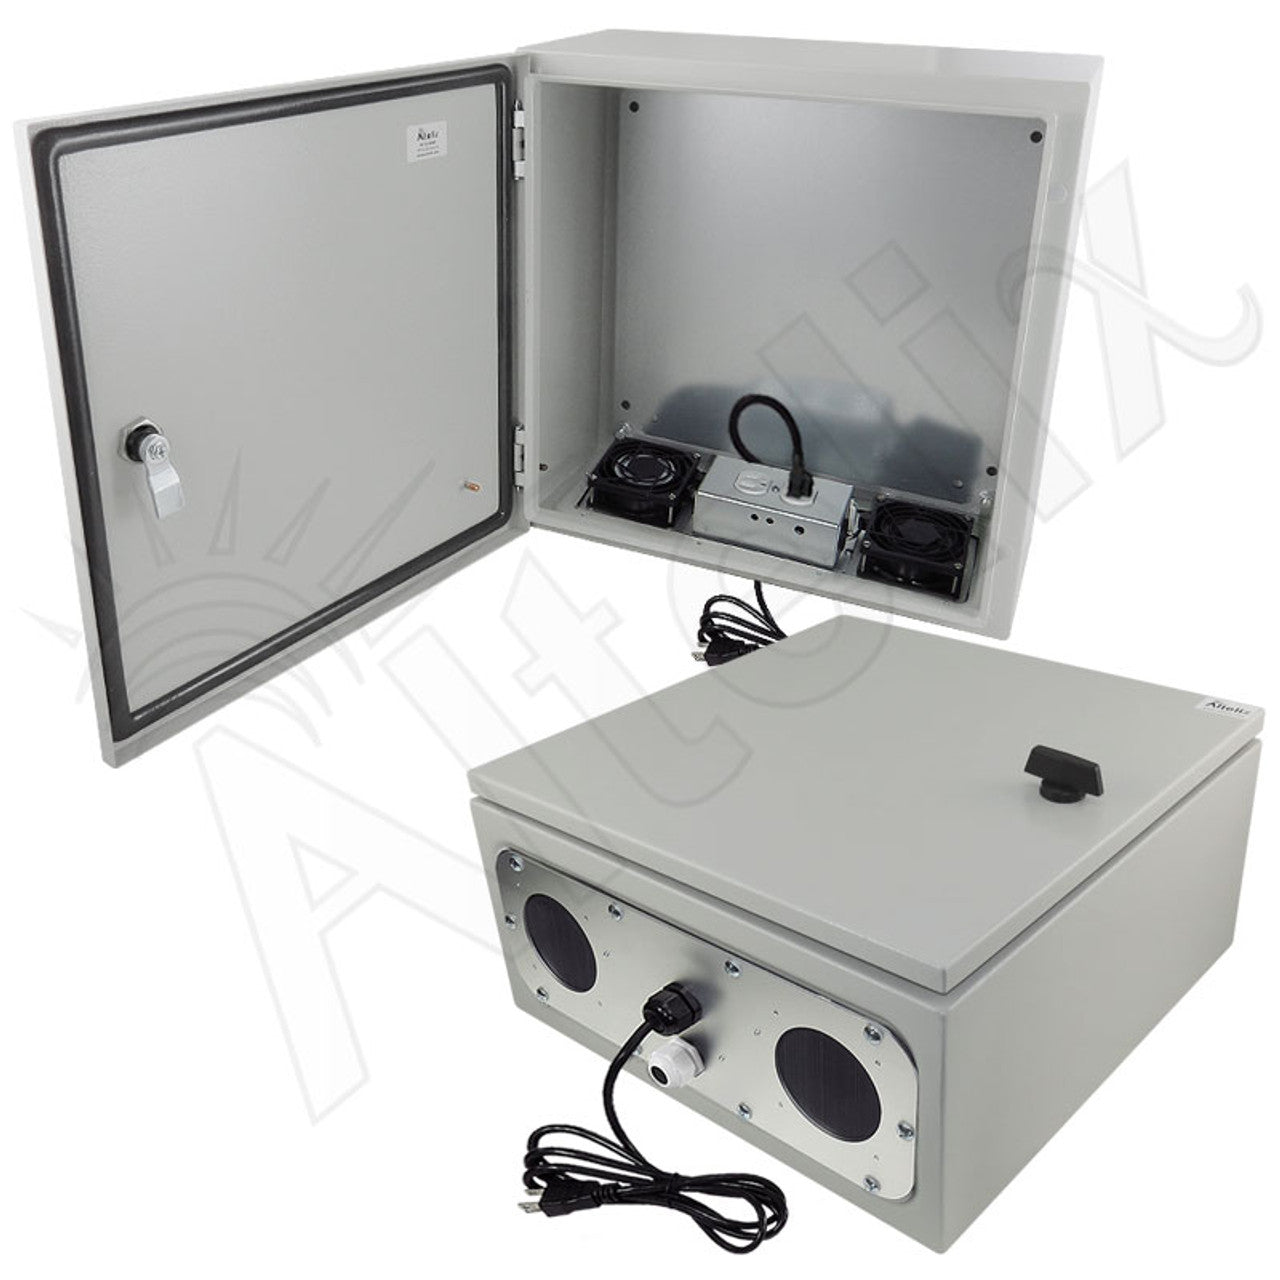 Altelix Steel Heated Weatherproof NEMA Enclosure with Dual Cooling Fans, 200W Heater, 120 VAC Outlets and Power Cord-1